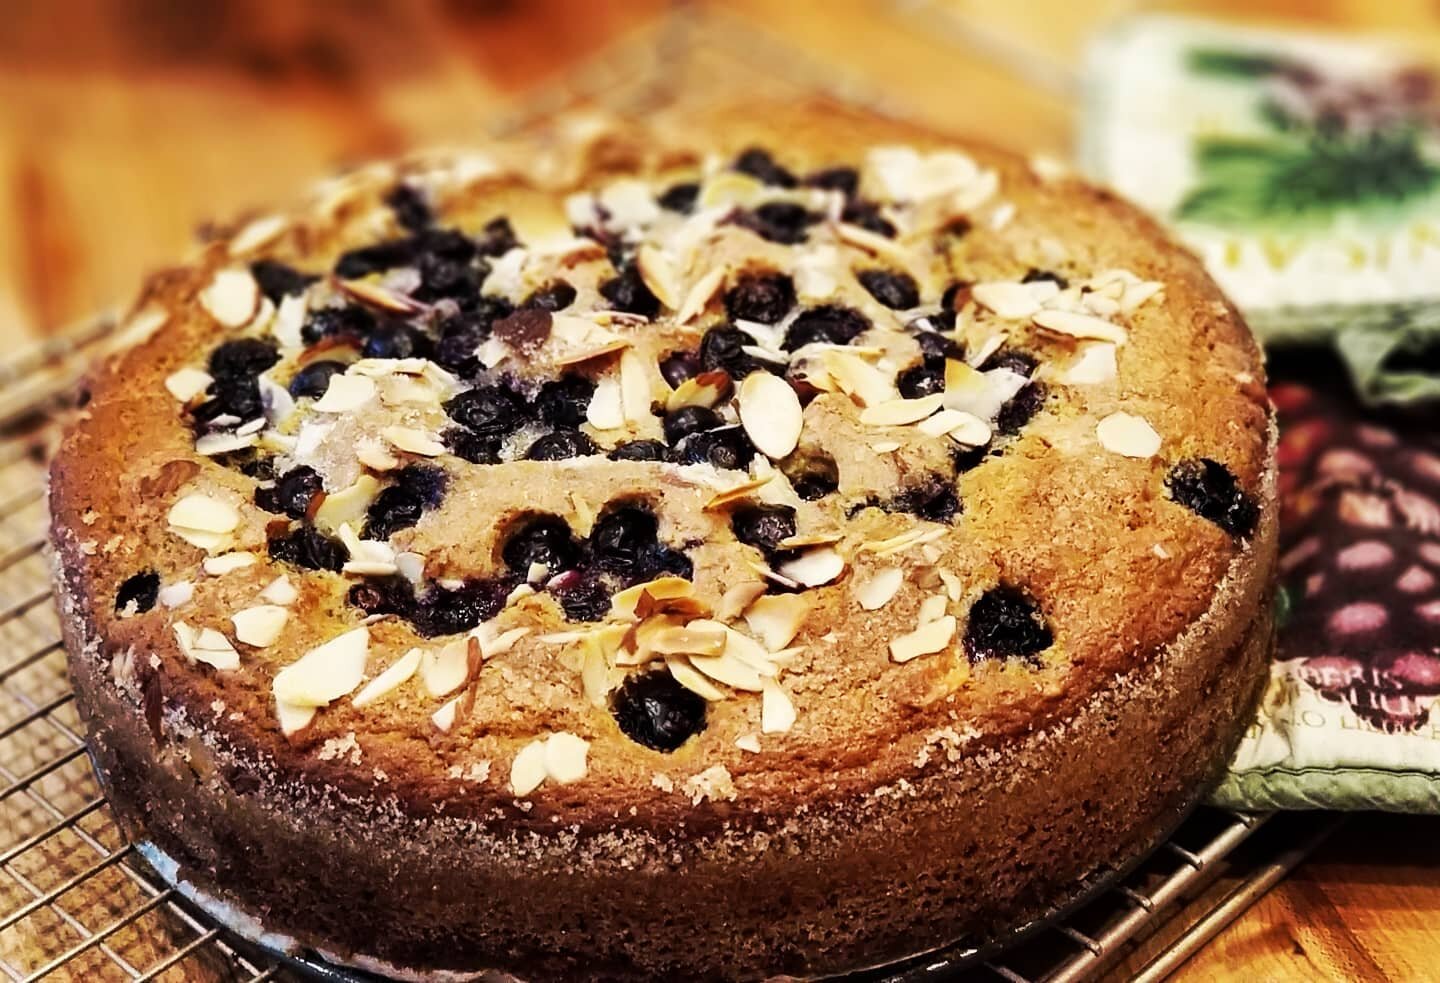 I'm calling this a Buttermilk Cardamom Cake with Blueberries and Almonds and a Lemon Blueberry Compote.
It's really just the most delicious and simple cake ever. Check out&nbsp;@kacc3&nbsp;'s recipe for &quot;House Cake&quot; on our website www.salto